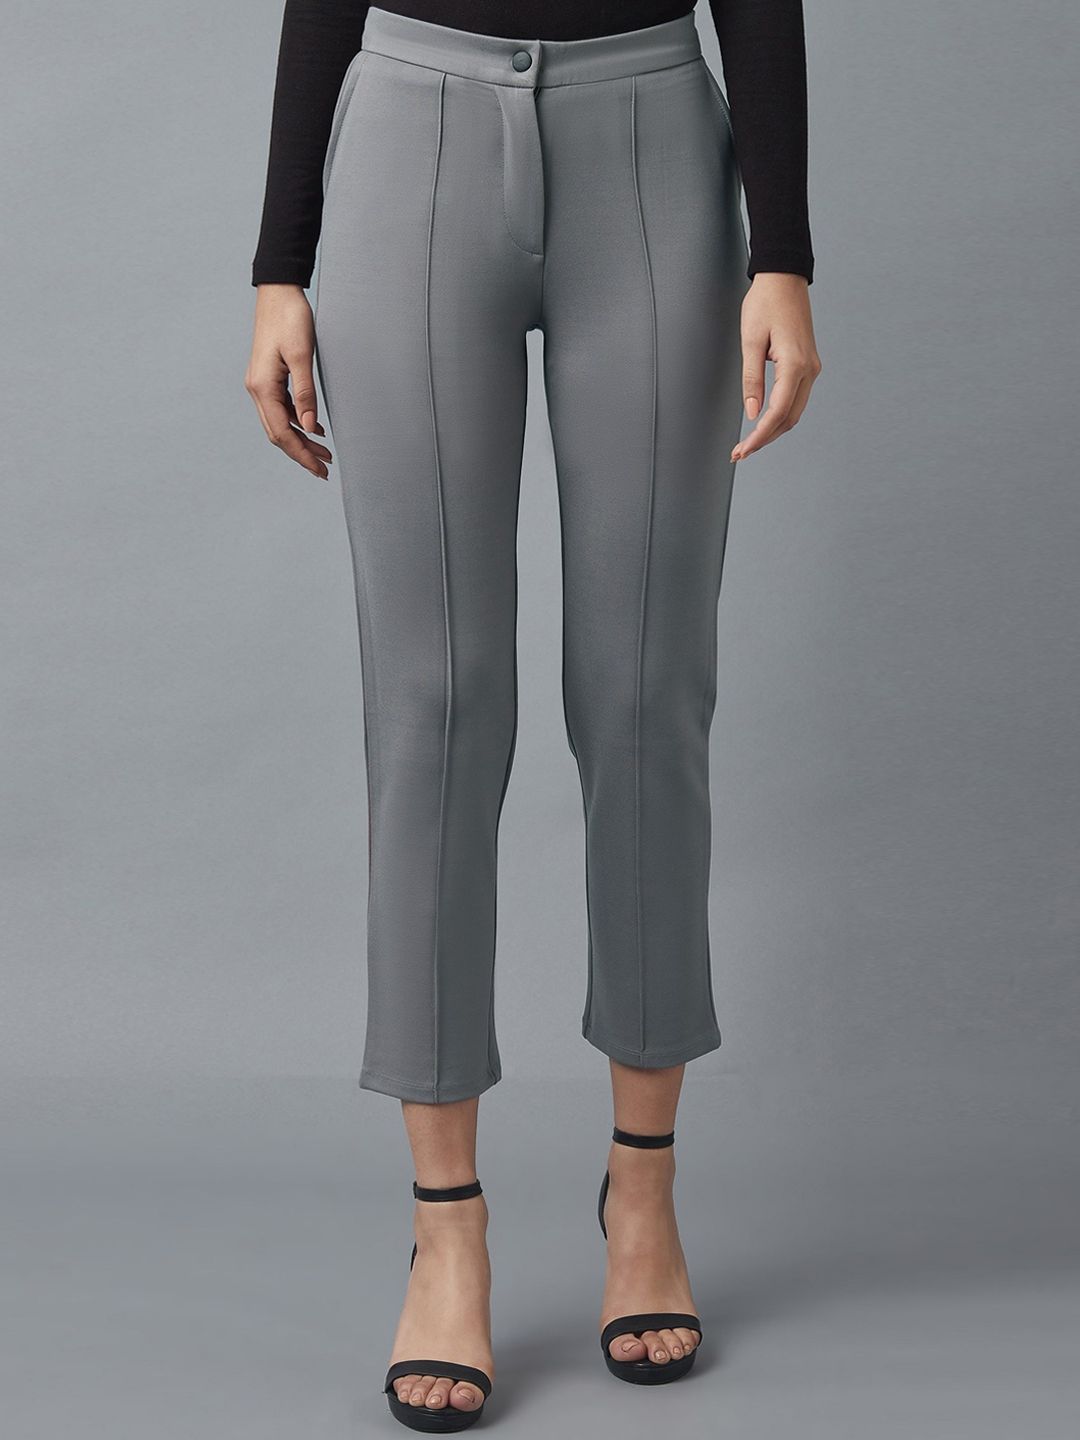 elleven Women Grey Slim Fit Cropped Trousers Price in India